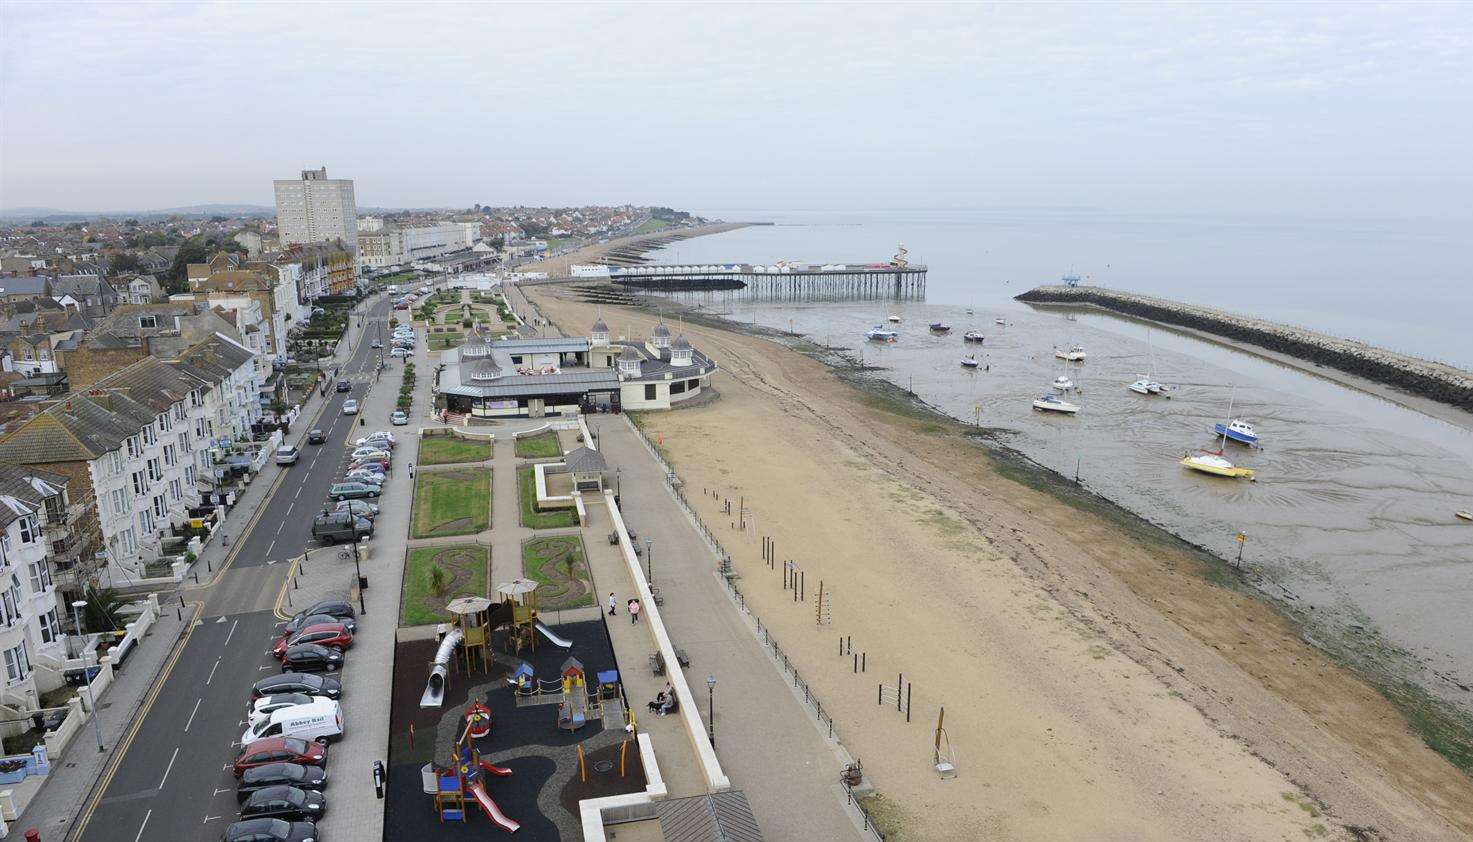 A rare shot of the seafront including the Central Bandstand, Pier, Neptunes Arm and out to Hampton